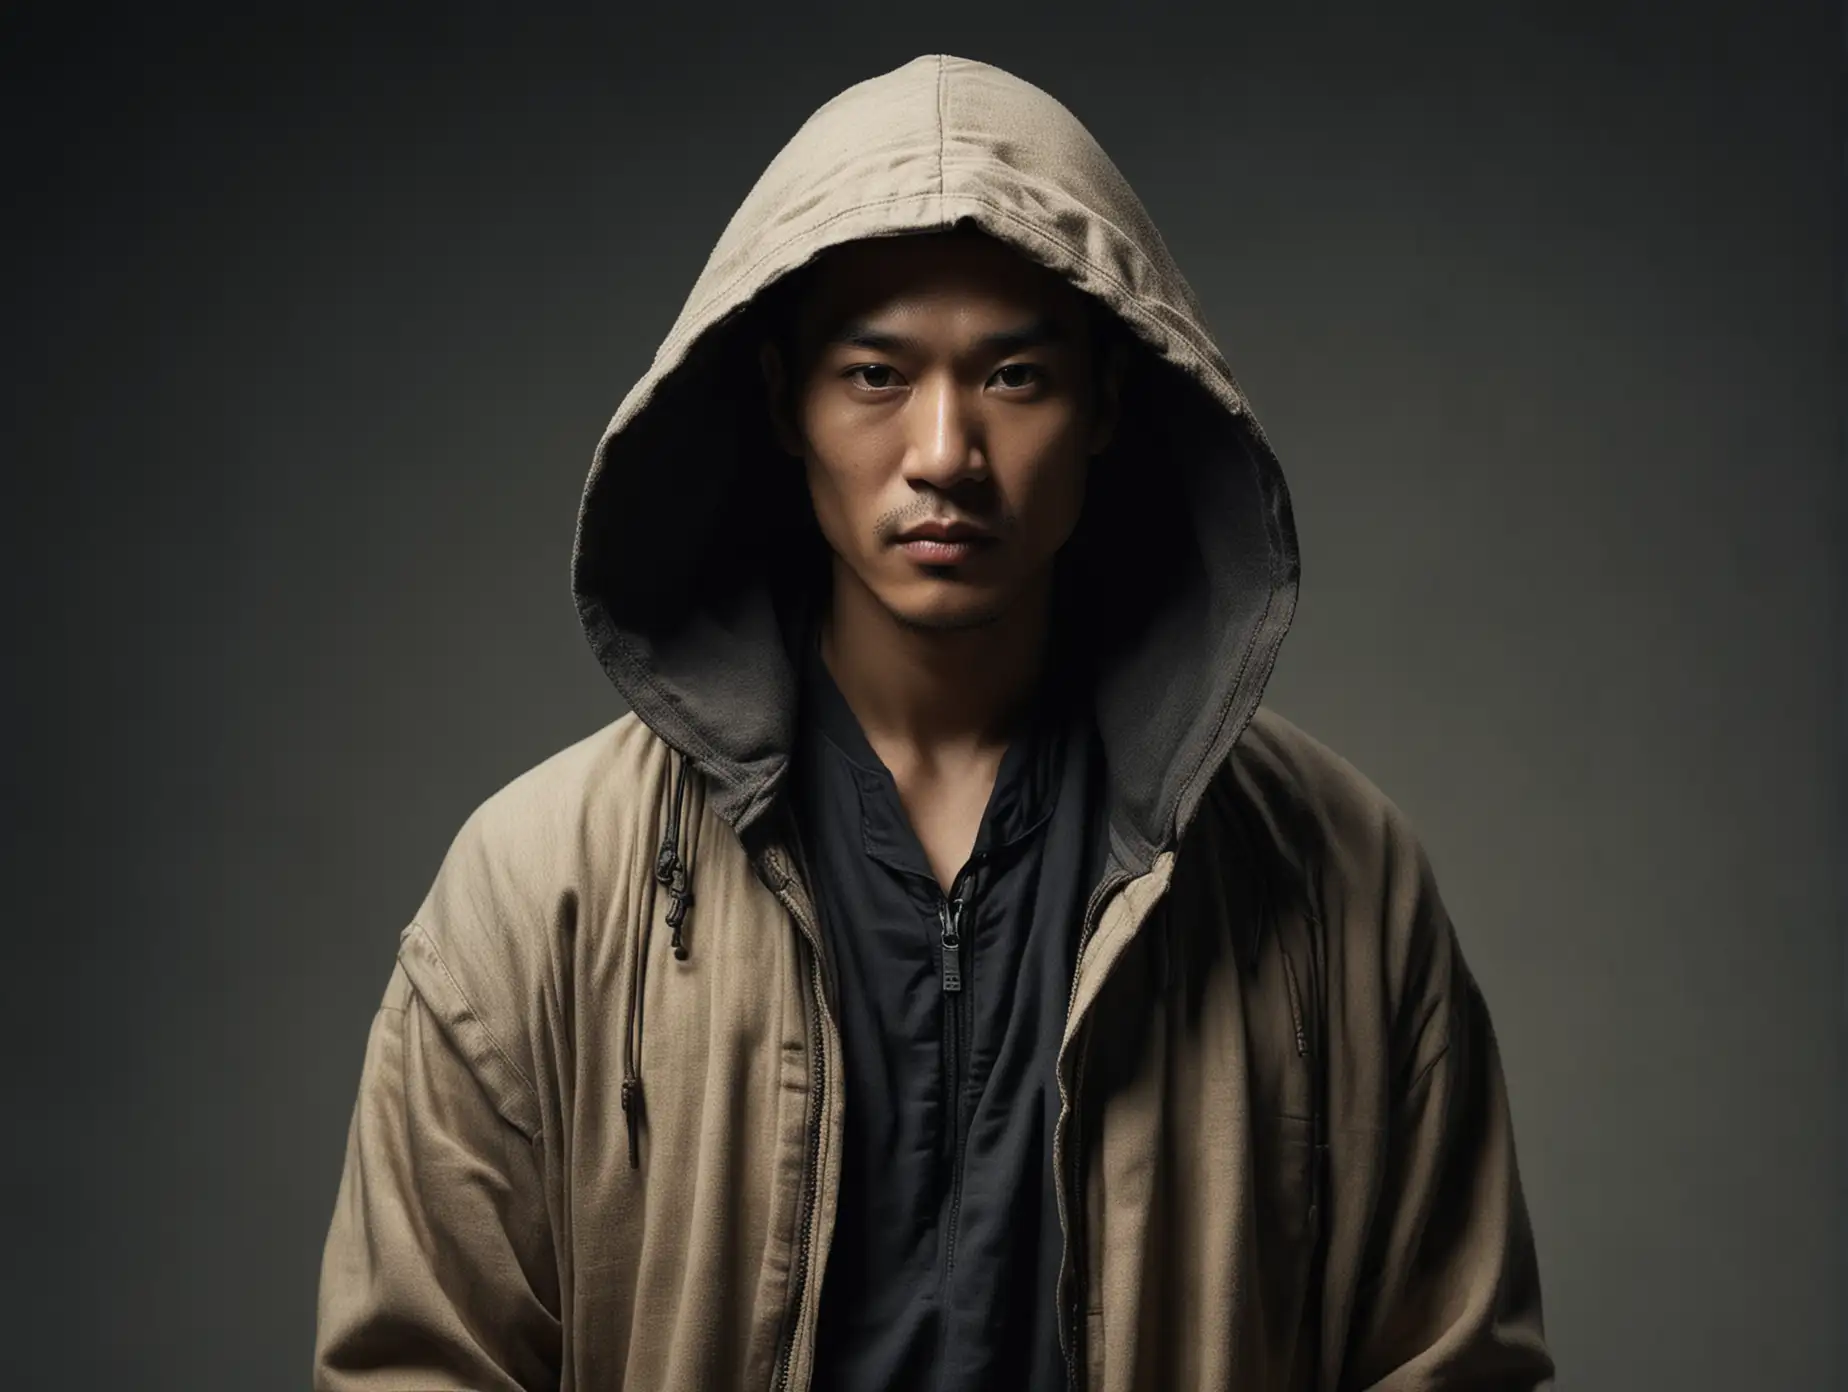 In Annie Leibovitz’s photograph, an asian man of main character from 'Dune' movie, he is wearing hoodie. the scene with her signature moody Lightroom tone, utilizing a Sigma 85mm f/1.4 lens. She deftly adjusts focal lengths, including 15mm and 35mm, to ensure the highest resolution, perfect for both 4K and 8K displays. Presented in full color, the image showcases a blend of high definition and 4K resolutions